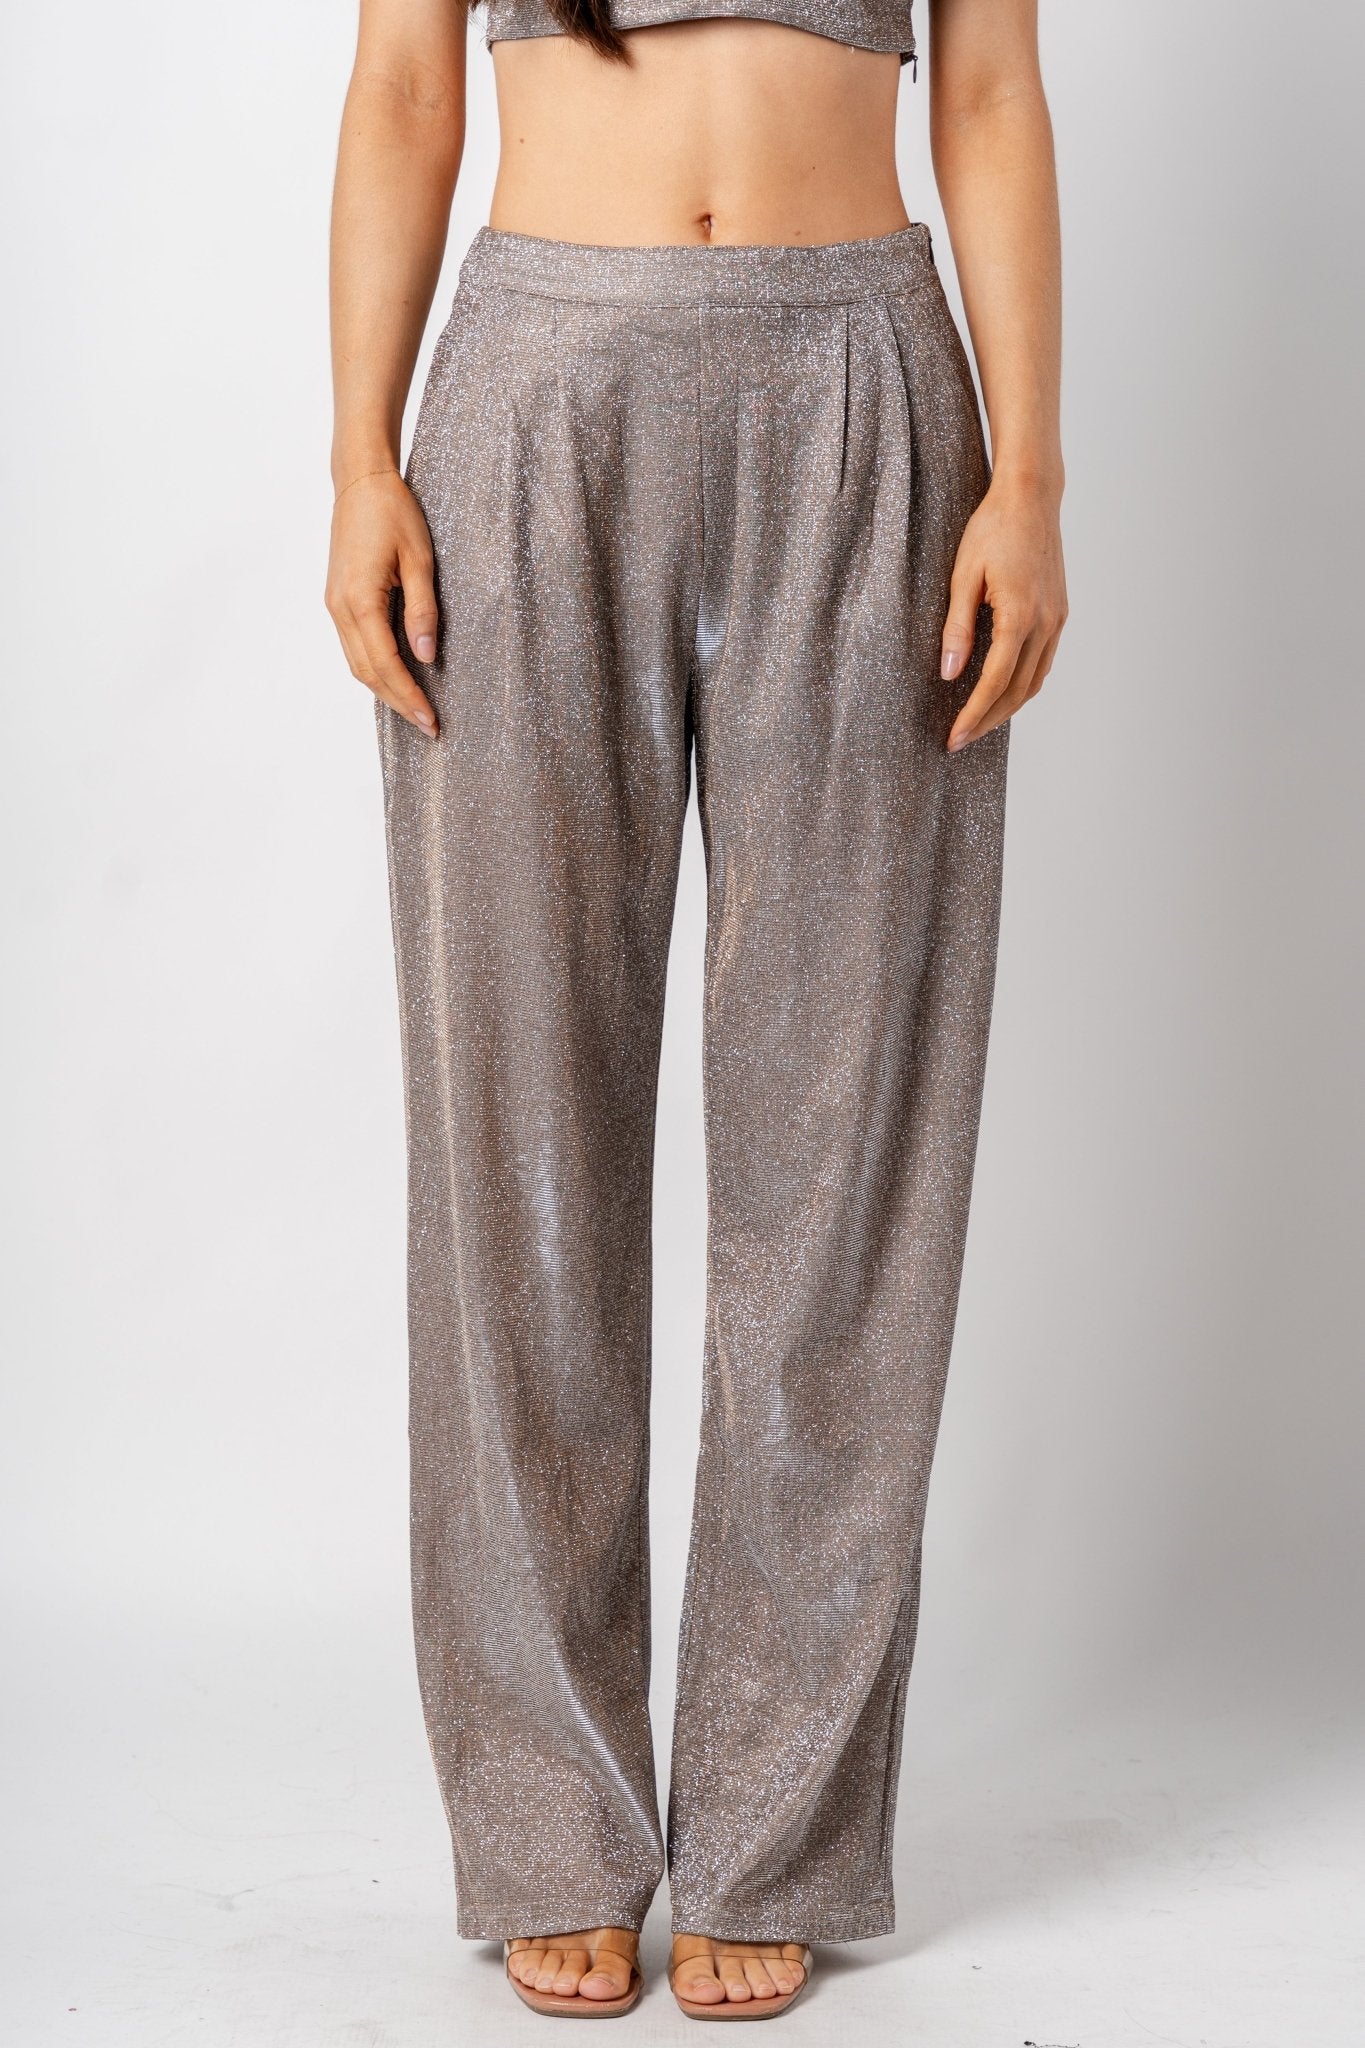 comfy pants that still look chic - District of Chic